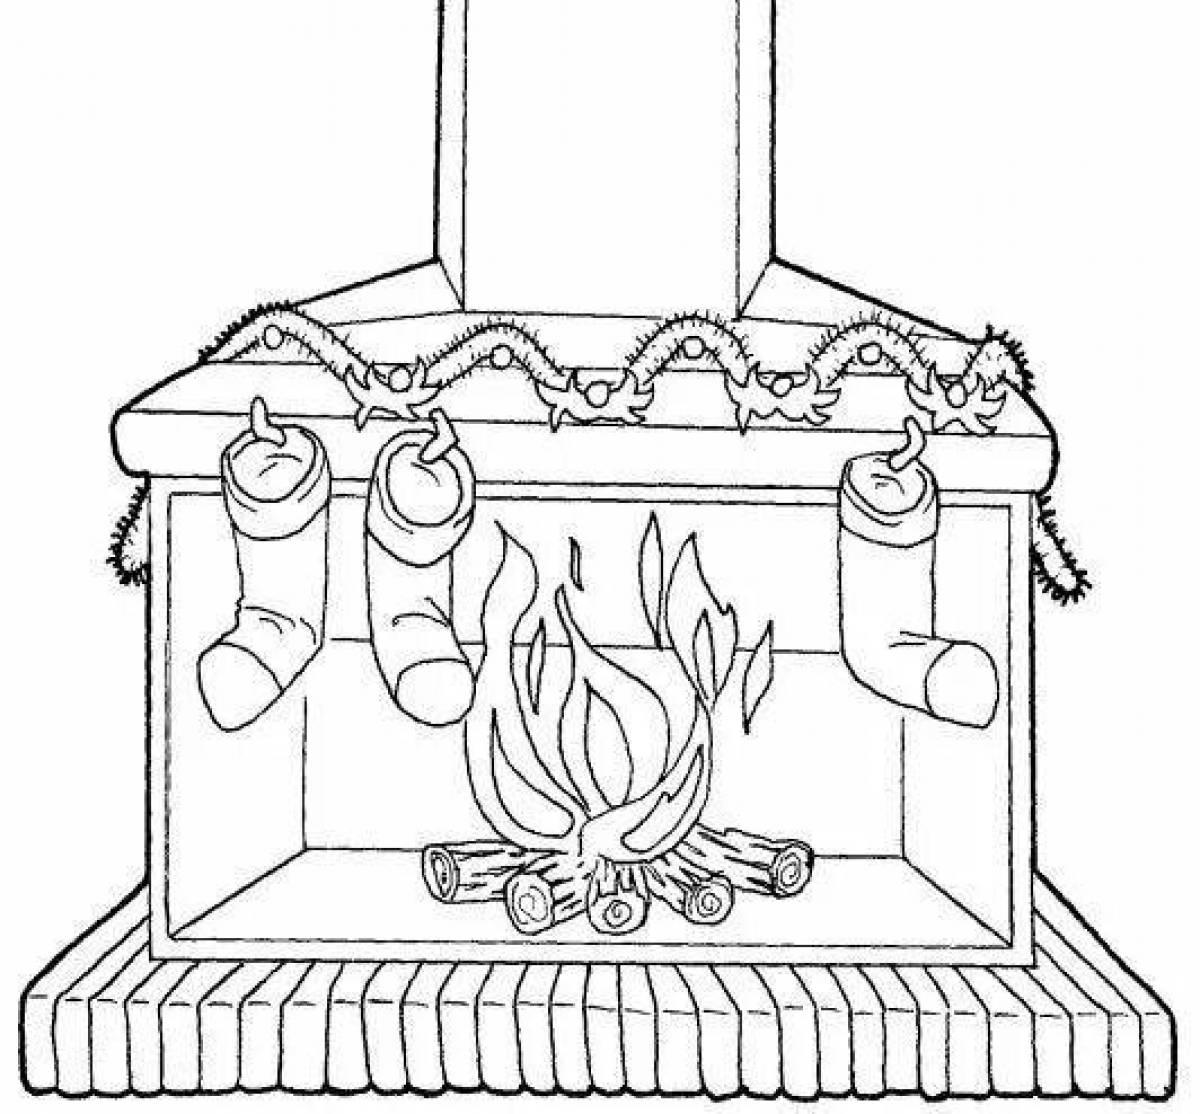 Charming fireplace coloring book